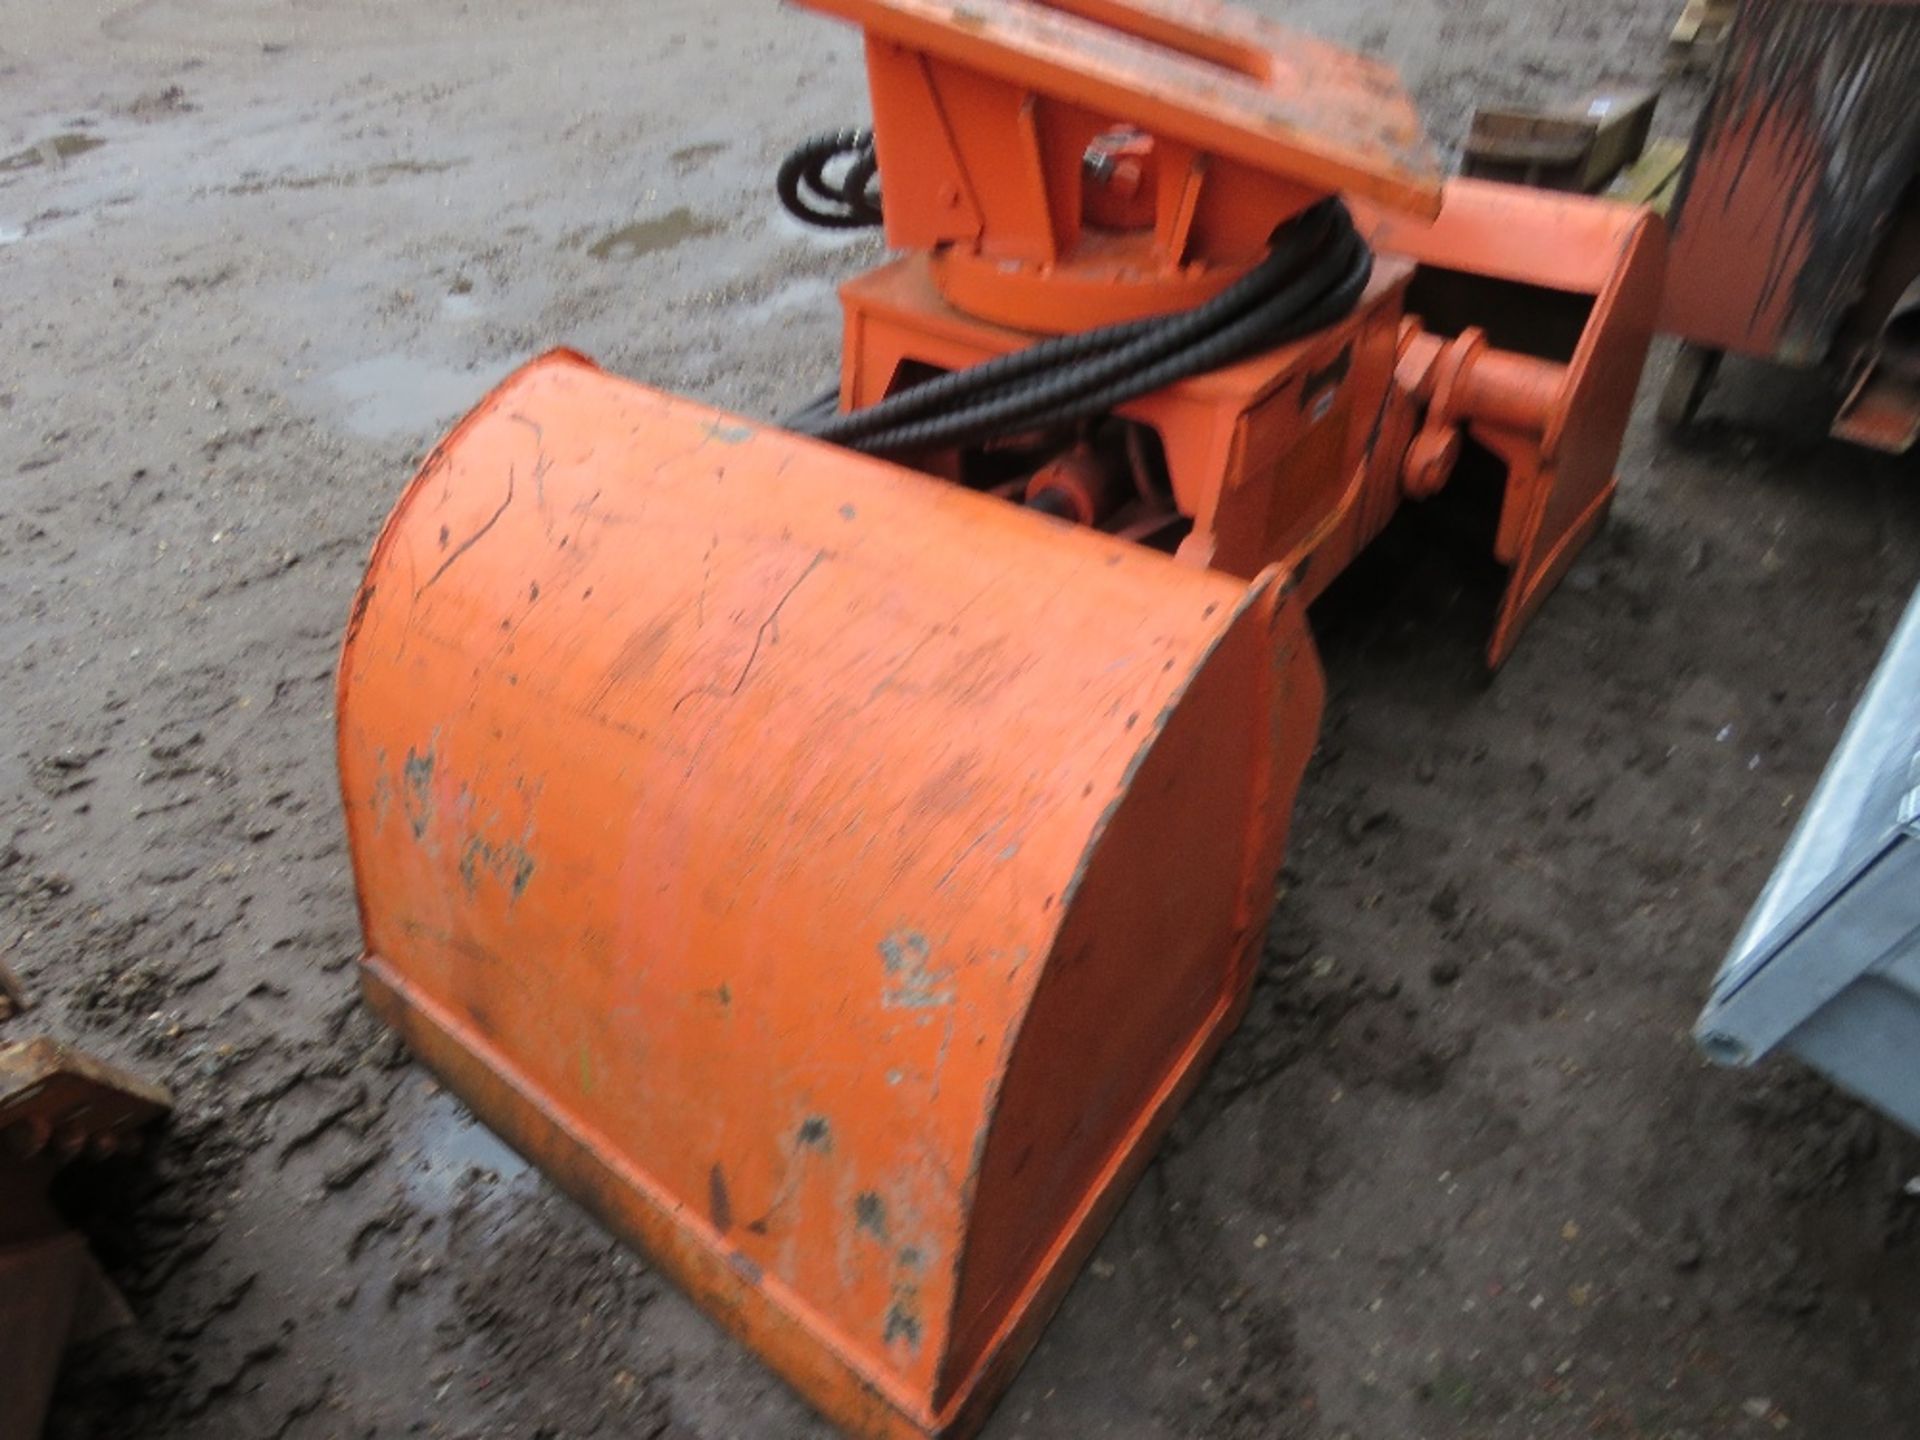 CLAMSHELL TYPE BUCKET GRAB DEEP EXCAVATION ATTACHMENT FOR EXCAVATOR, 0.88M WIDTH APPROX, APPEARS LIT - Image 5 of 6